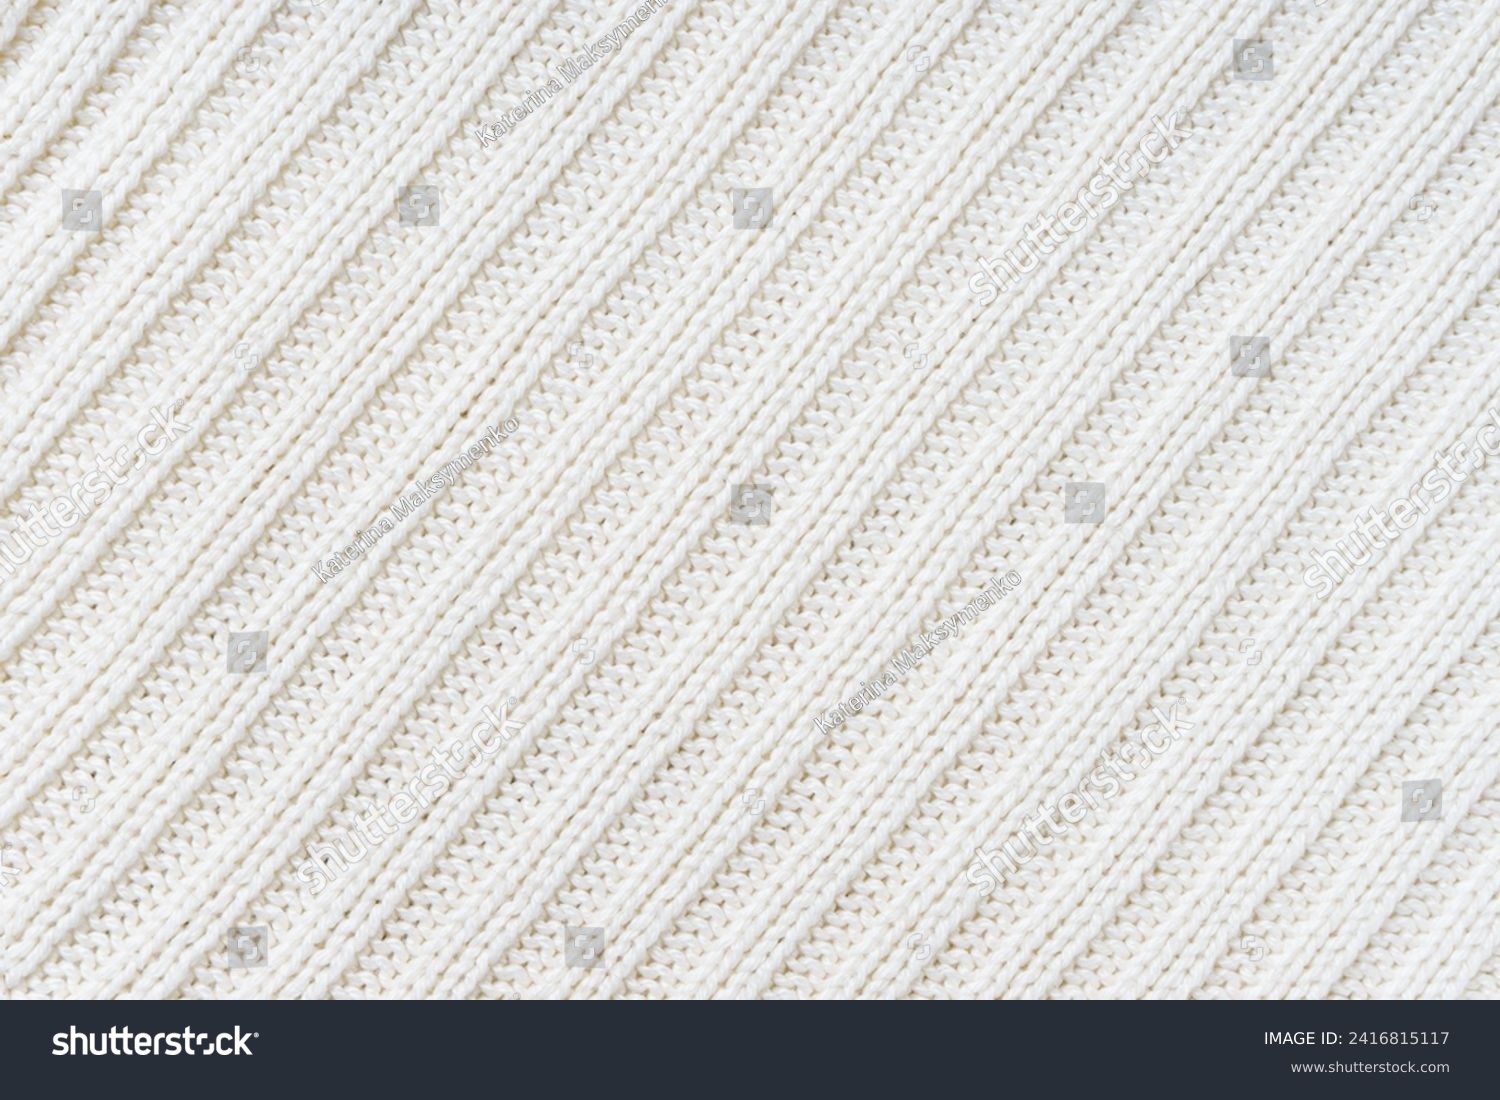 Jersey textile background , white diagonal striped knitted fabric. Woolen knitwear, sweater, pullover surface texture, textile structure, cloth surface, weaving of knitwear material #2416815117